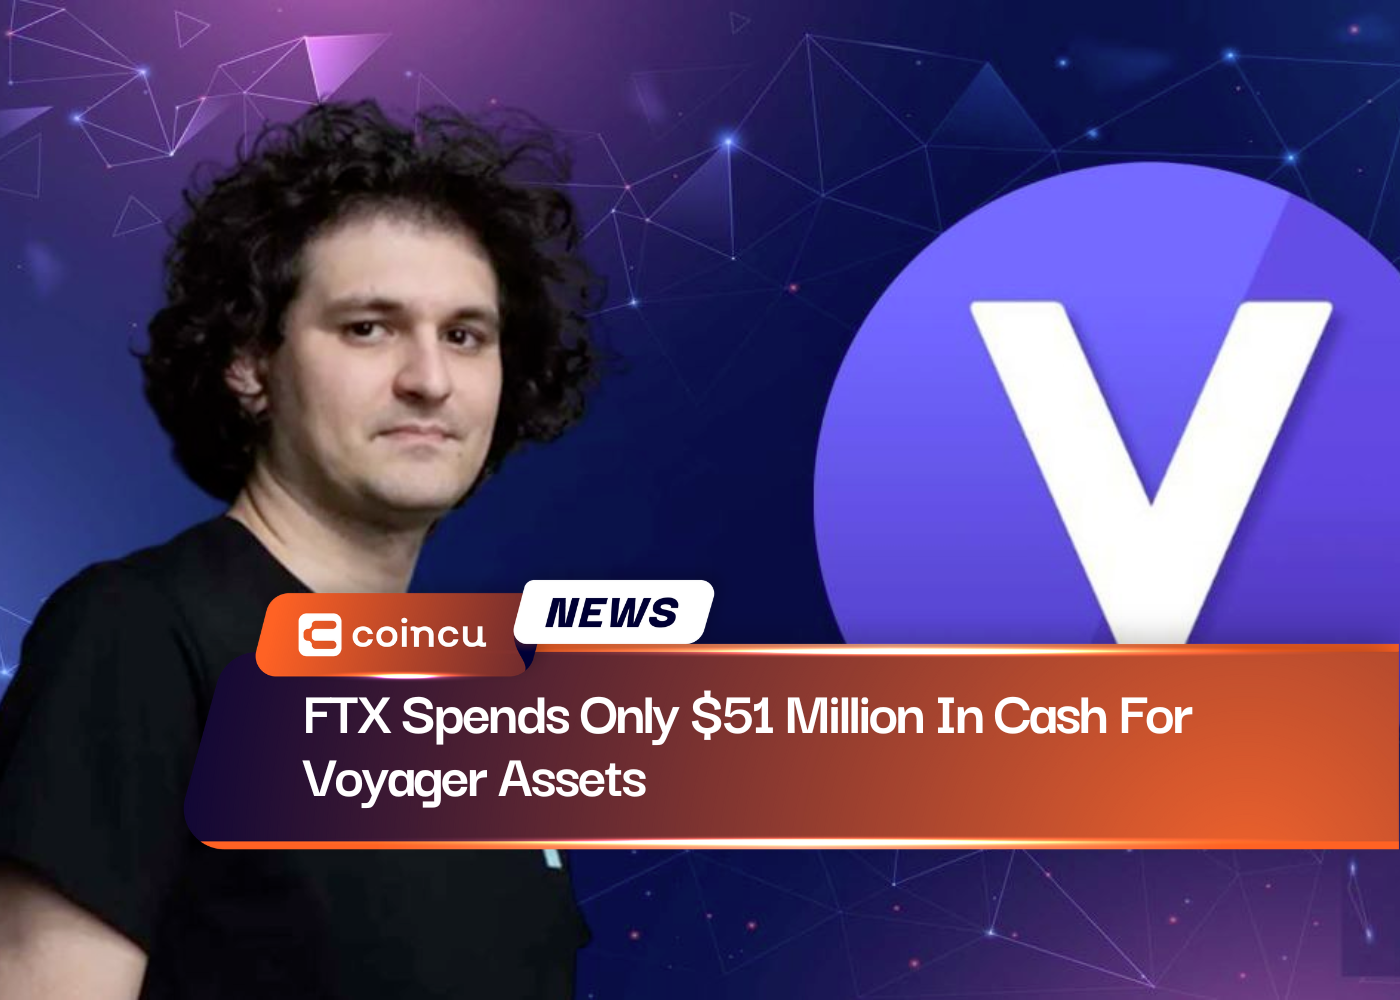 FTX Spends Only $51 Million In Cash For Voyager Assets